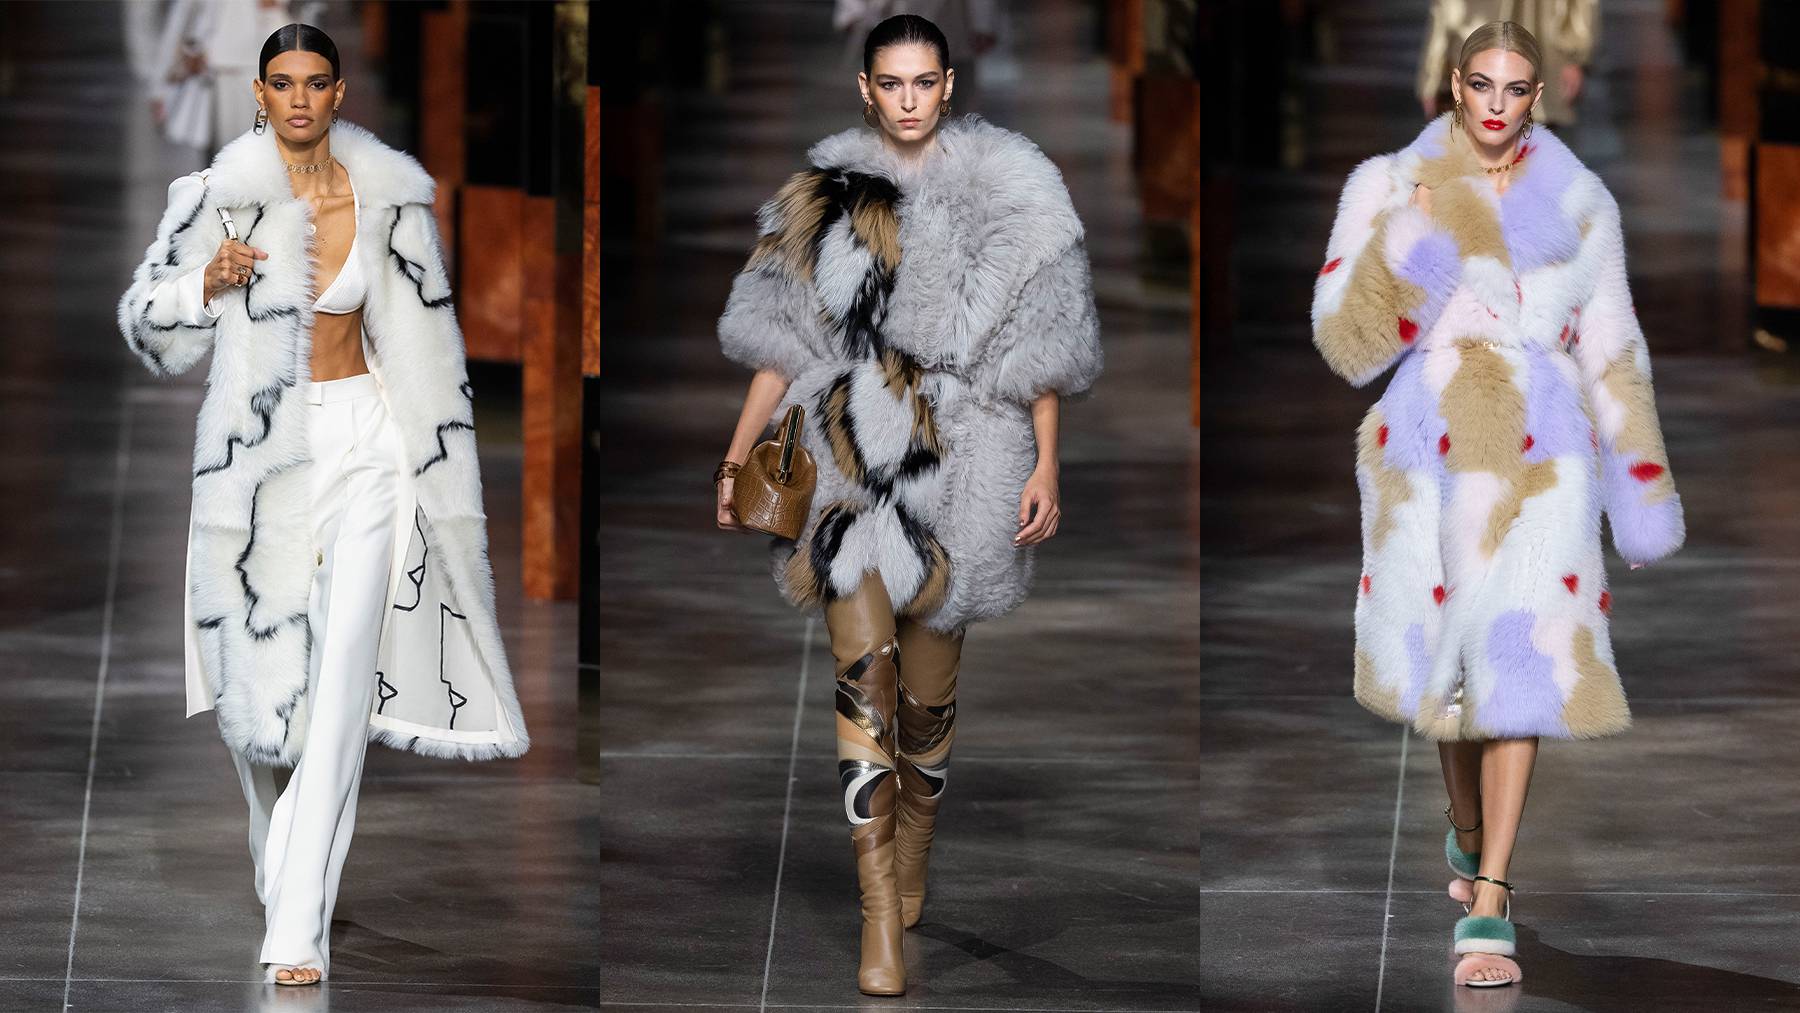 LVMH-owned Fendi staged its Spring/Summer 2022 show in Milan on Wednesday which included decadent furs but less than 48 hours later, the group’s arch-rival Kering announced it was going fur-free. Courtesy.